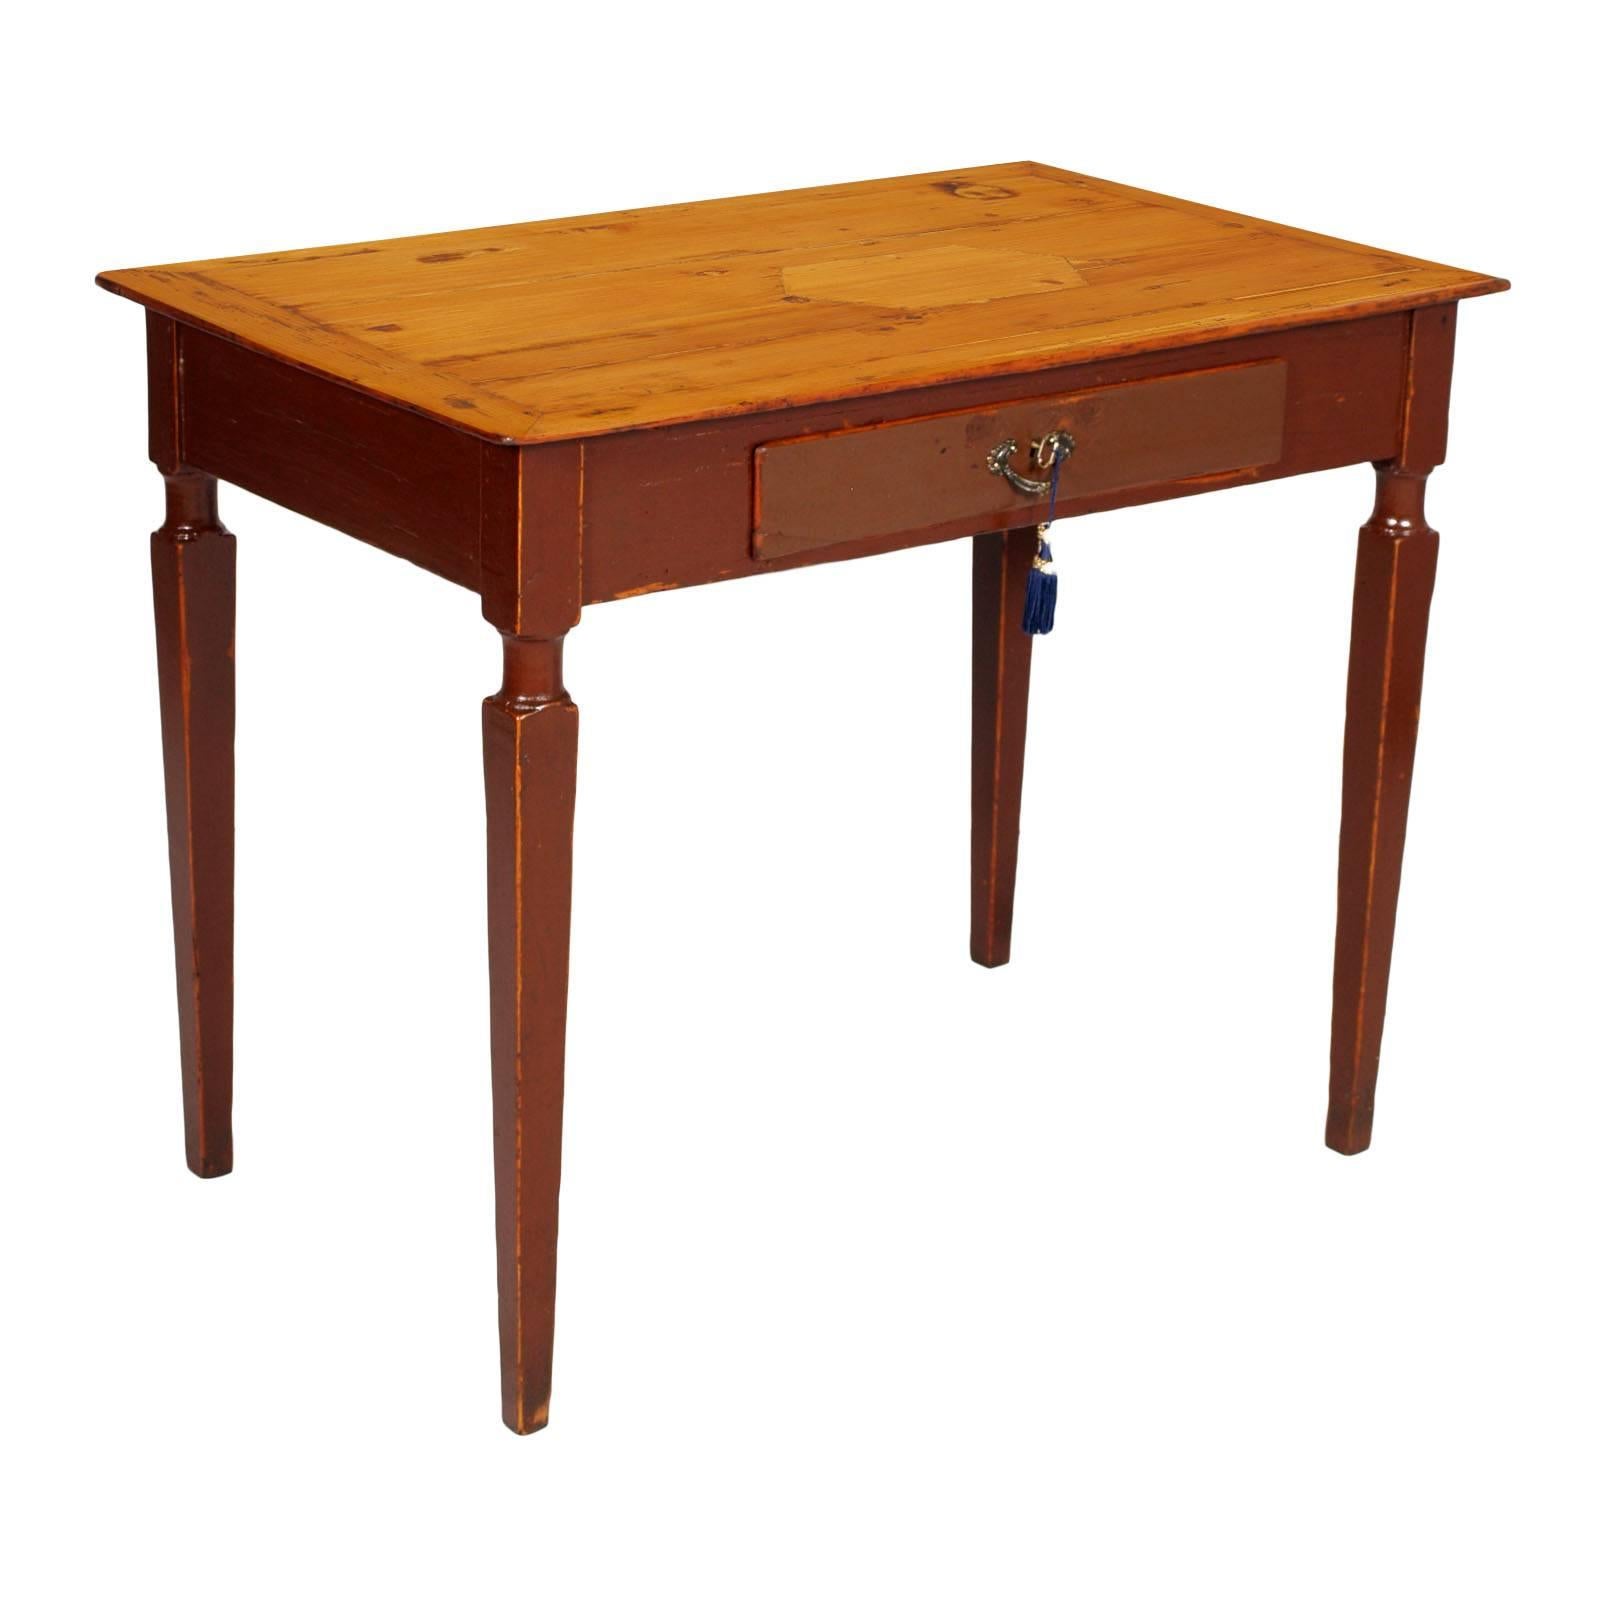 18th Century Rustic Desk Table, Country Table, Original Pinewood Laquered Waxed For Sale